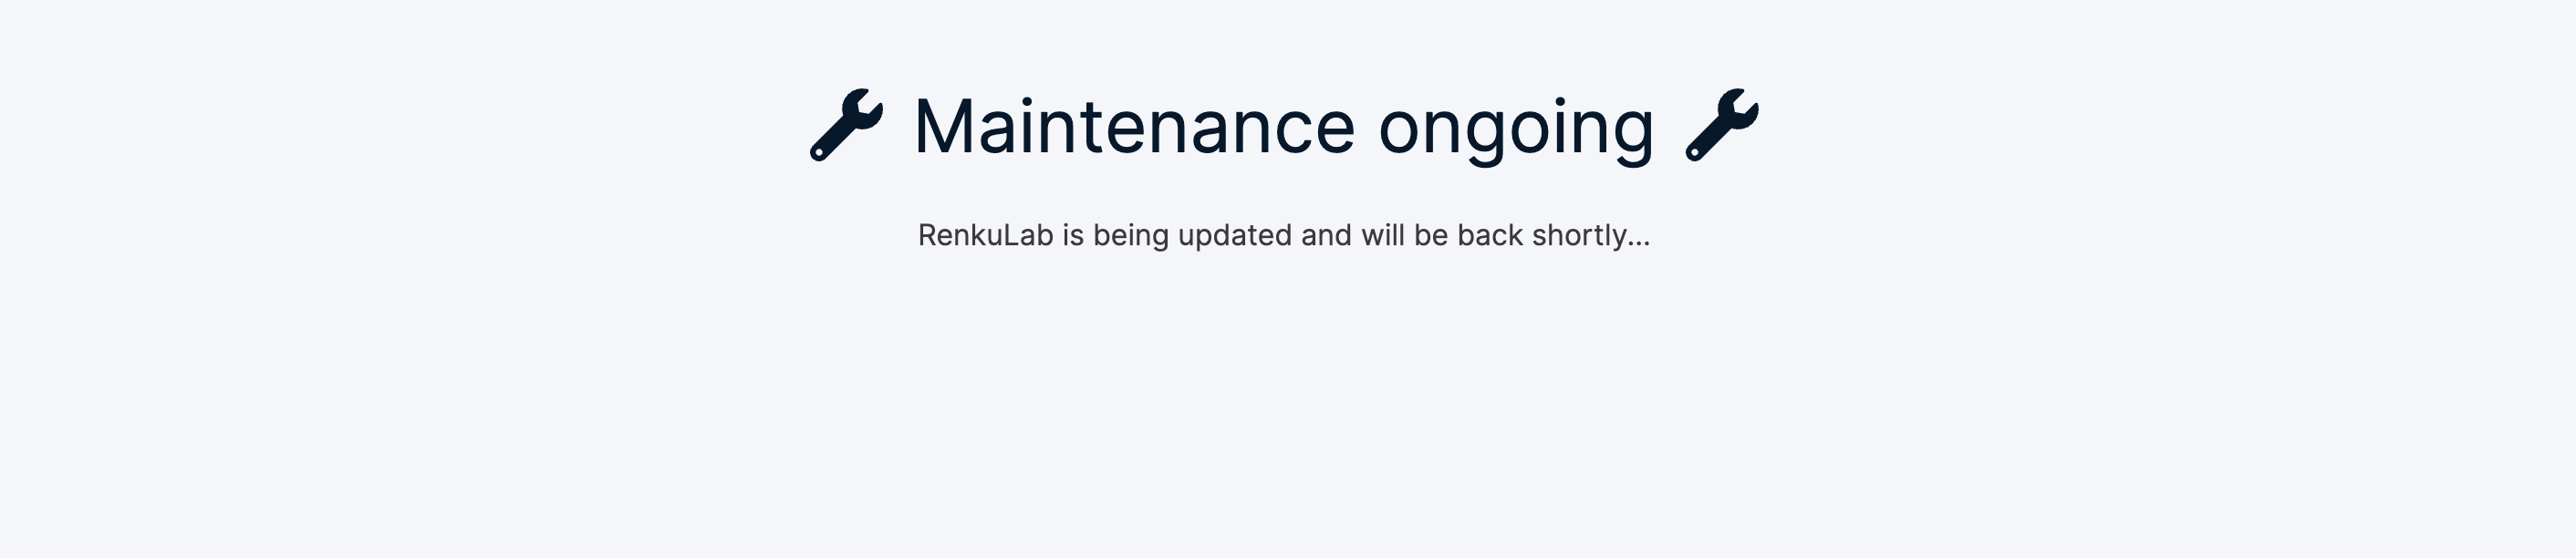 Ongoing maintenance example